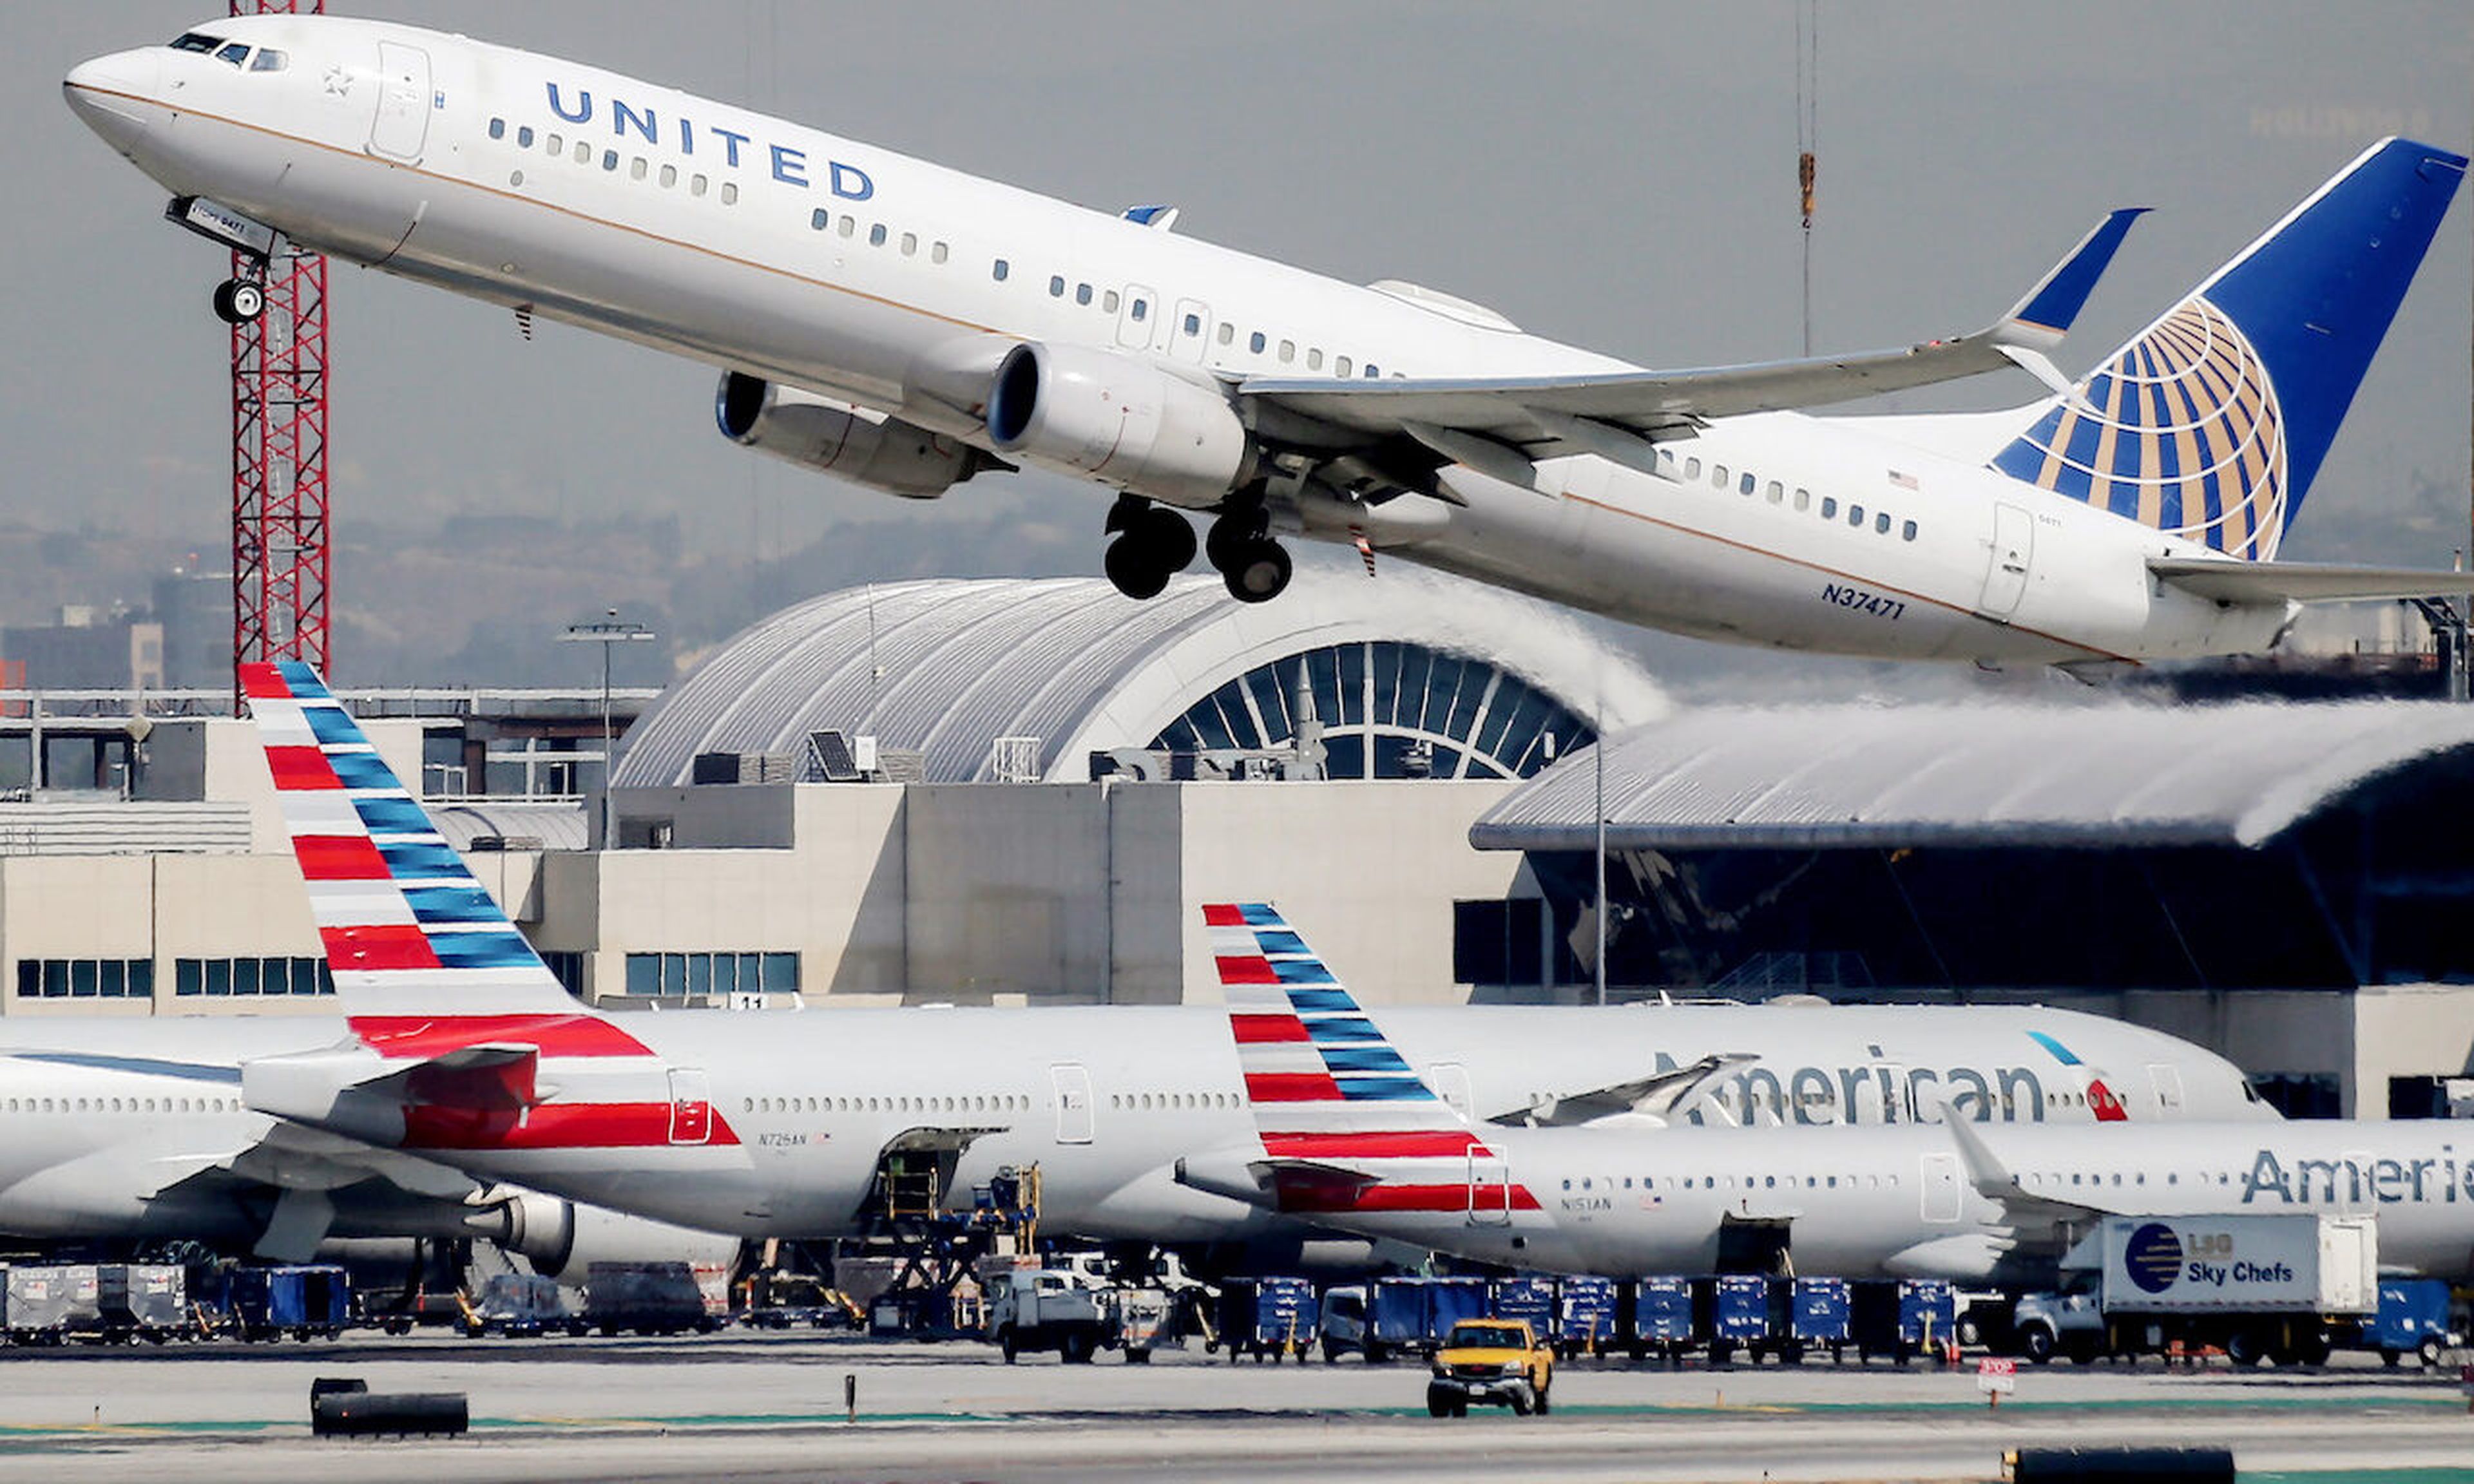 A United Airlines plane takes off at Los Angeles International Airport (LAX) on October 1, 2020 in Los Angeles, California. LAX was among the airports that saw their websites go down as a result of a DDoS attack Monday.   (Photo by Mario Tama/Getty Images)